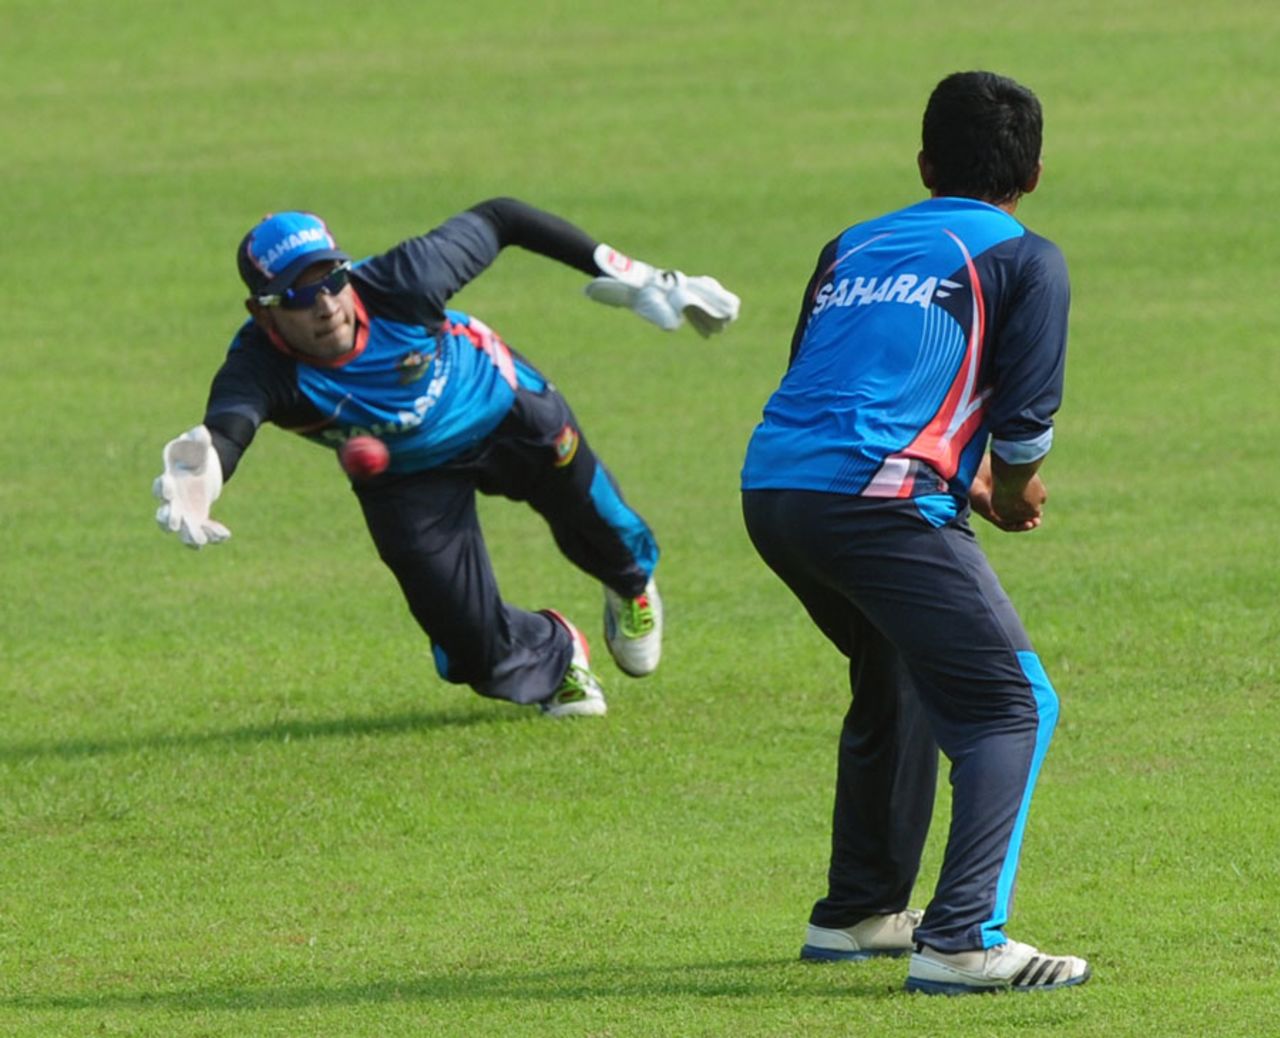 Mushfiqur Rahim dives for a catch during a training session, Dhaka, October 20, 2013